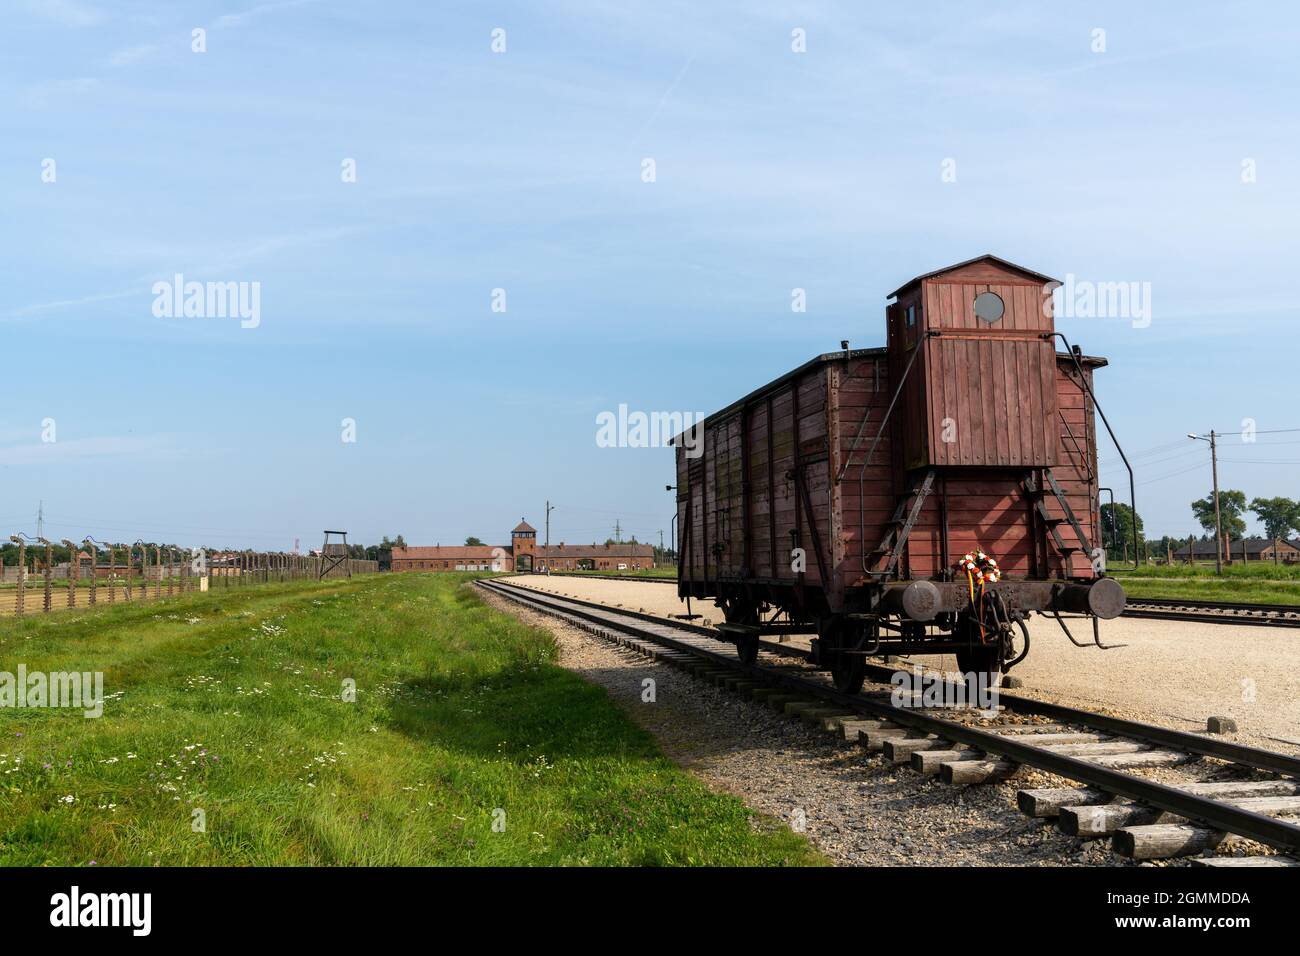 Auschwitz, Poland - 15 September, 2021: Auschwitz Concentration Camp in Poland with railroad tracks and a wooden carriage for transporting prisoners i Stock Photo